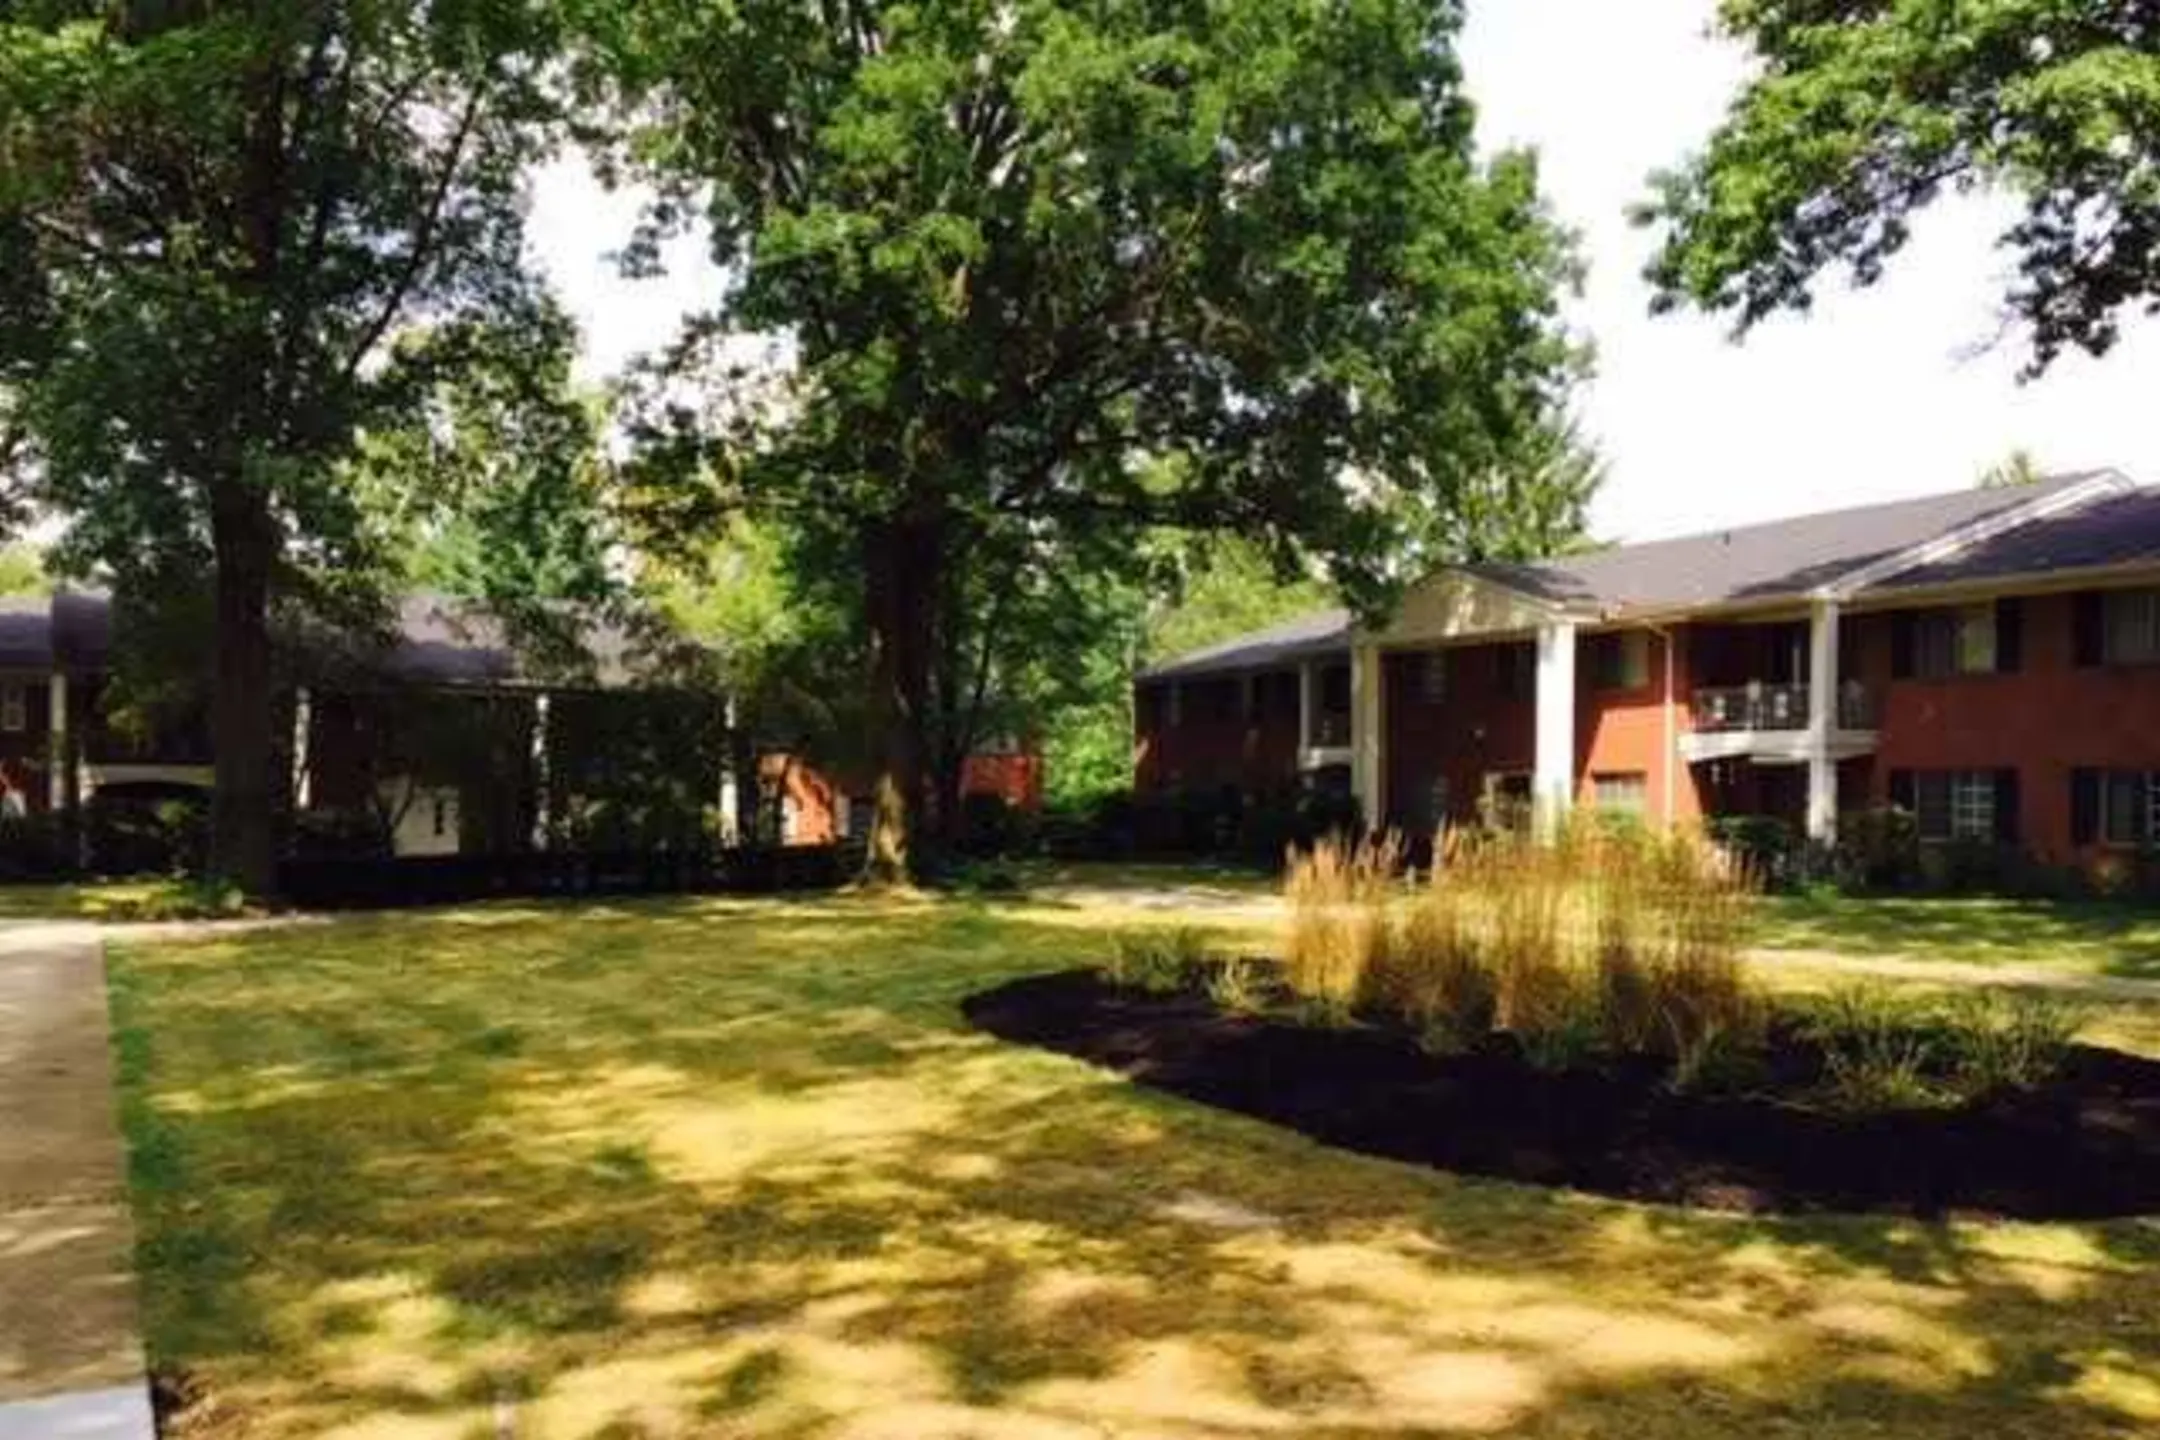 Landscaping - Monticello Apartments & Townhomes - Youngstown, OH